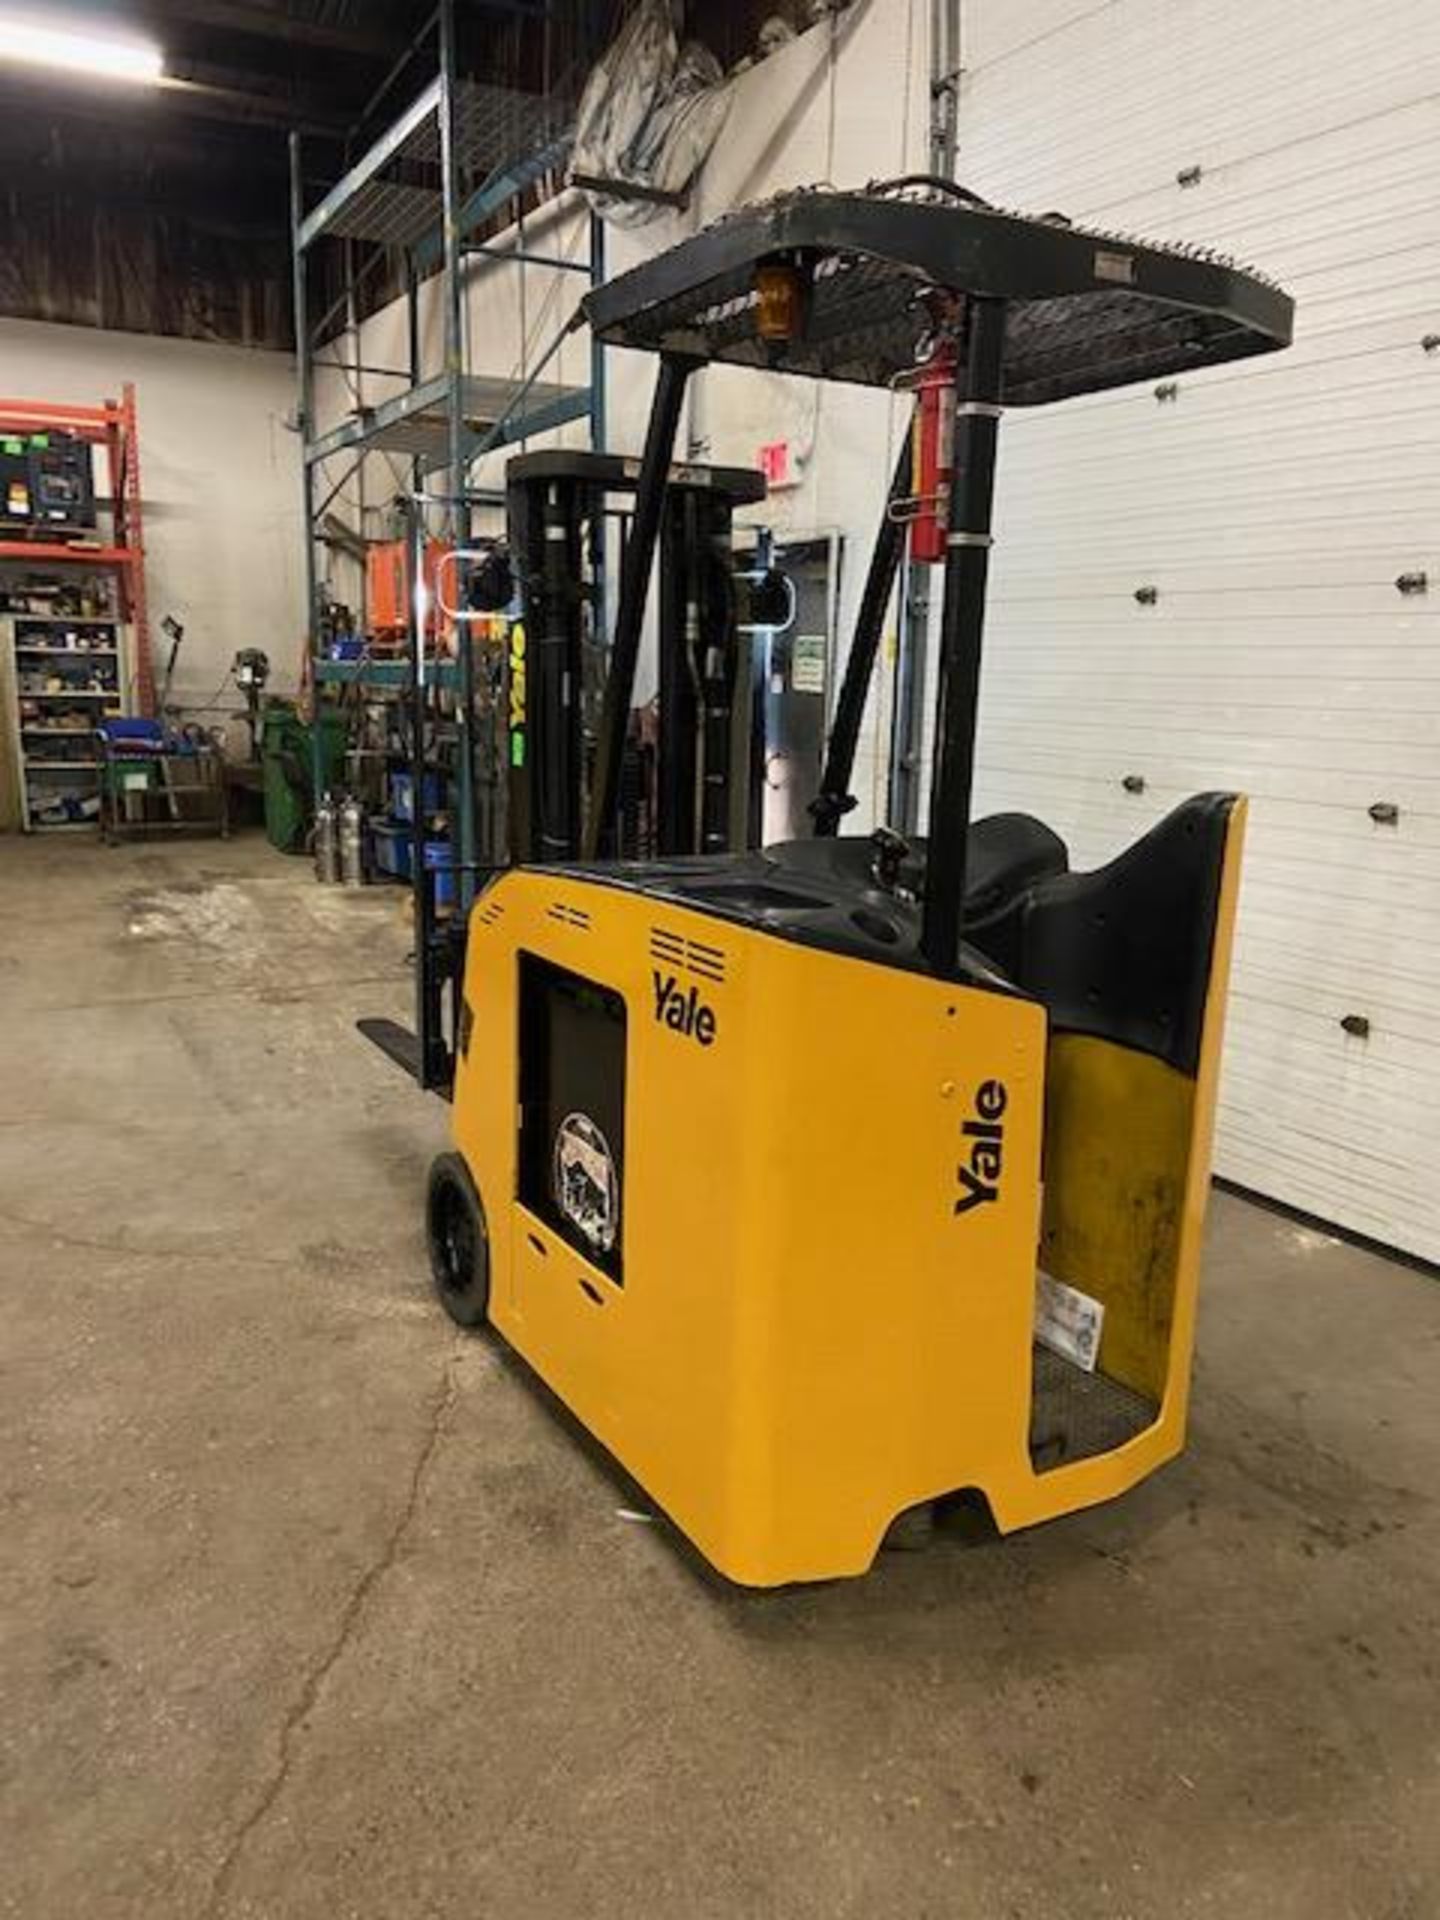 FREE CUSTOMS - 2013 YALE 4000lbs Capacity Stand On Forklift Electric with sideshift and 3 stage - Image 3 of 3